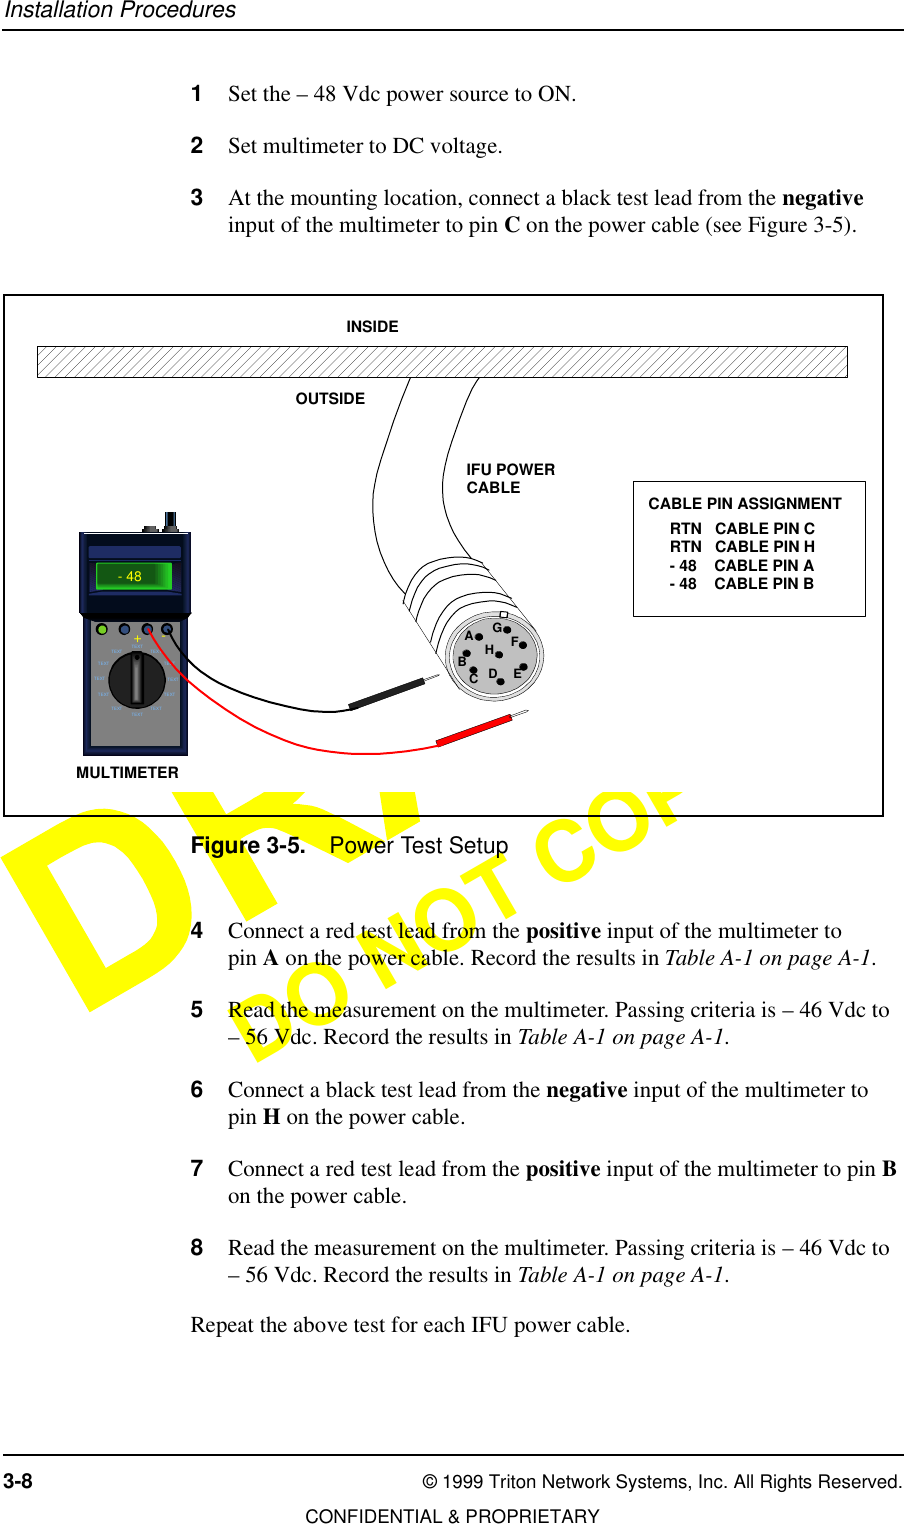 Installation Procedures3-8 © 1999 Triton Network Systems, Inc. All Rights Reserved.CONFIDENTIAL &amp; PROPRIETARYDO NOT COPY1Set the – 48 Vdc power source to ON.2Set multimeter to DC voltage.3At the mounting location, connect a black test lead from the negative input of the multimeter to pin C on the power cable (see Figure 3-5).Figure 3-5. Power Test Setup4Connect a red test lead from the positive input of the multimeter to pin A on the power cable. Record the results in Table A-1 on page A-1.5Read the measurement on the multimeter. Passing criteria is – 46 Vdc to – 56 Vdc. Record the results in Table A-1 on page A-1.6Connect a black test lead from the negative input of the multimeter to pin H on the power cable.7Connect a red test lead from the positive input of the multimeter to pin B on the power cable.8Read the measurement on the multimeter. Passing criteria is – 46 Vdc to – 56 Vdc. Record the results in Table A-1 on page A-1.Repeat the above test for each IFU power cable.OUTSIDEINSIDEIFU POWERCABLERTN   CABLE PIN CRTN   CABLE PIN H- 48    CABLE PIN A- 48    CABLE PIN BCABLE PIN ASSIGNMENTAEDCBHGFTEXTTEXTTEXT TEXTTEXT TEXTTEXT TEXTTEXT TEXTTEXTTEXT- 48+- MULTIMETER